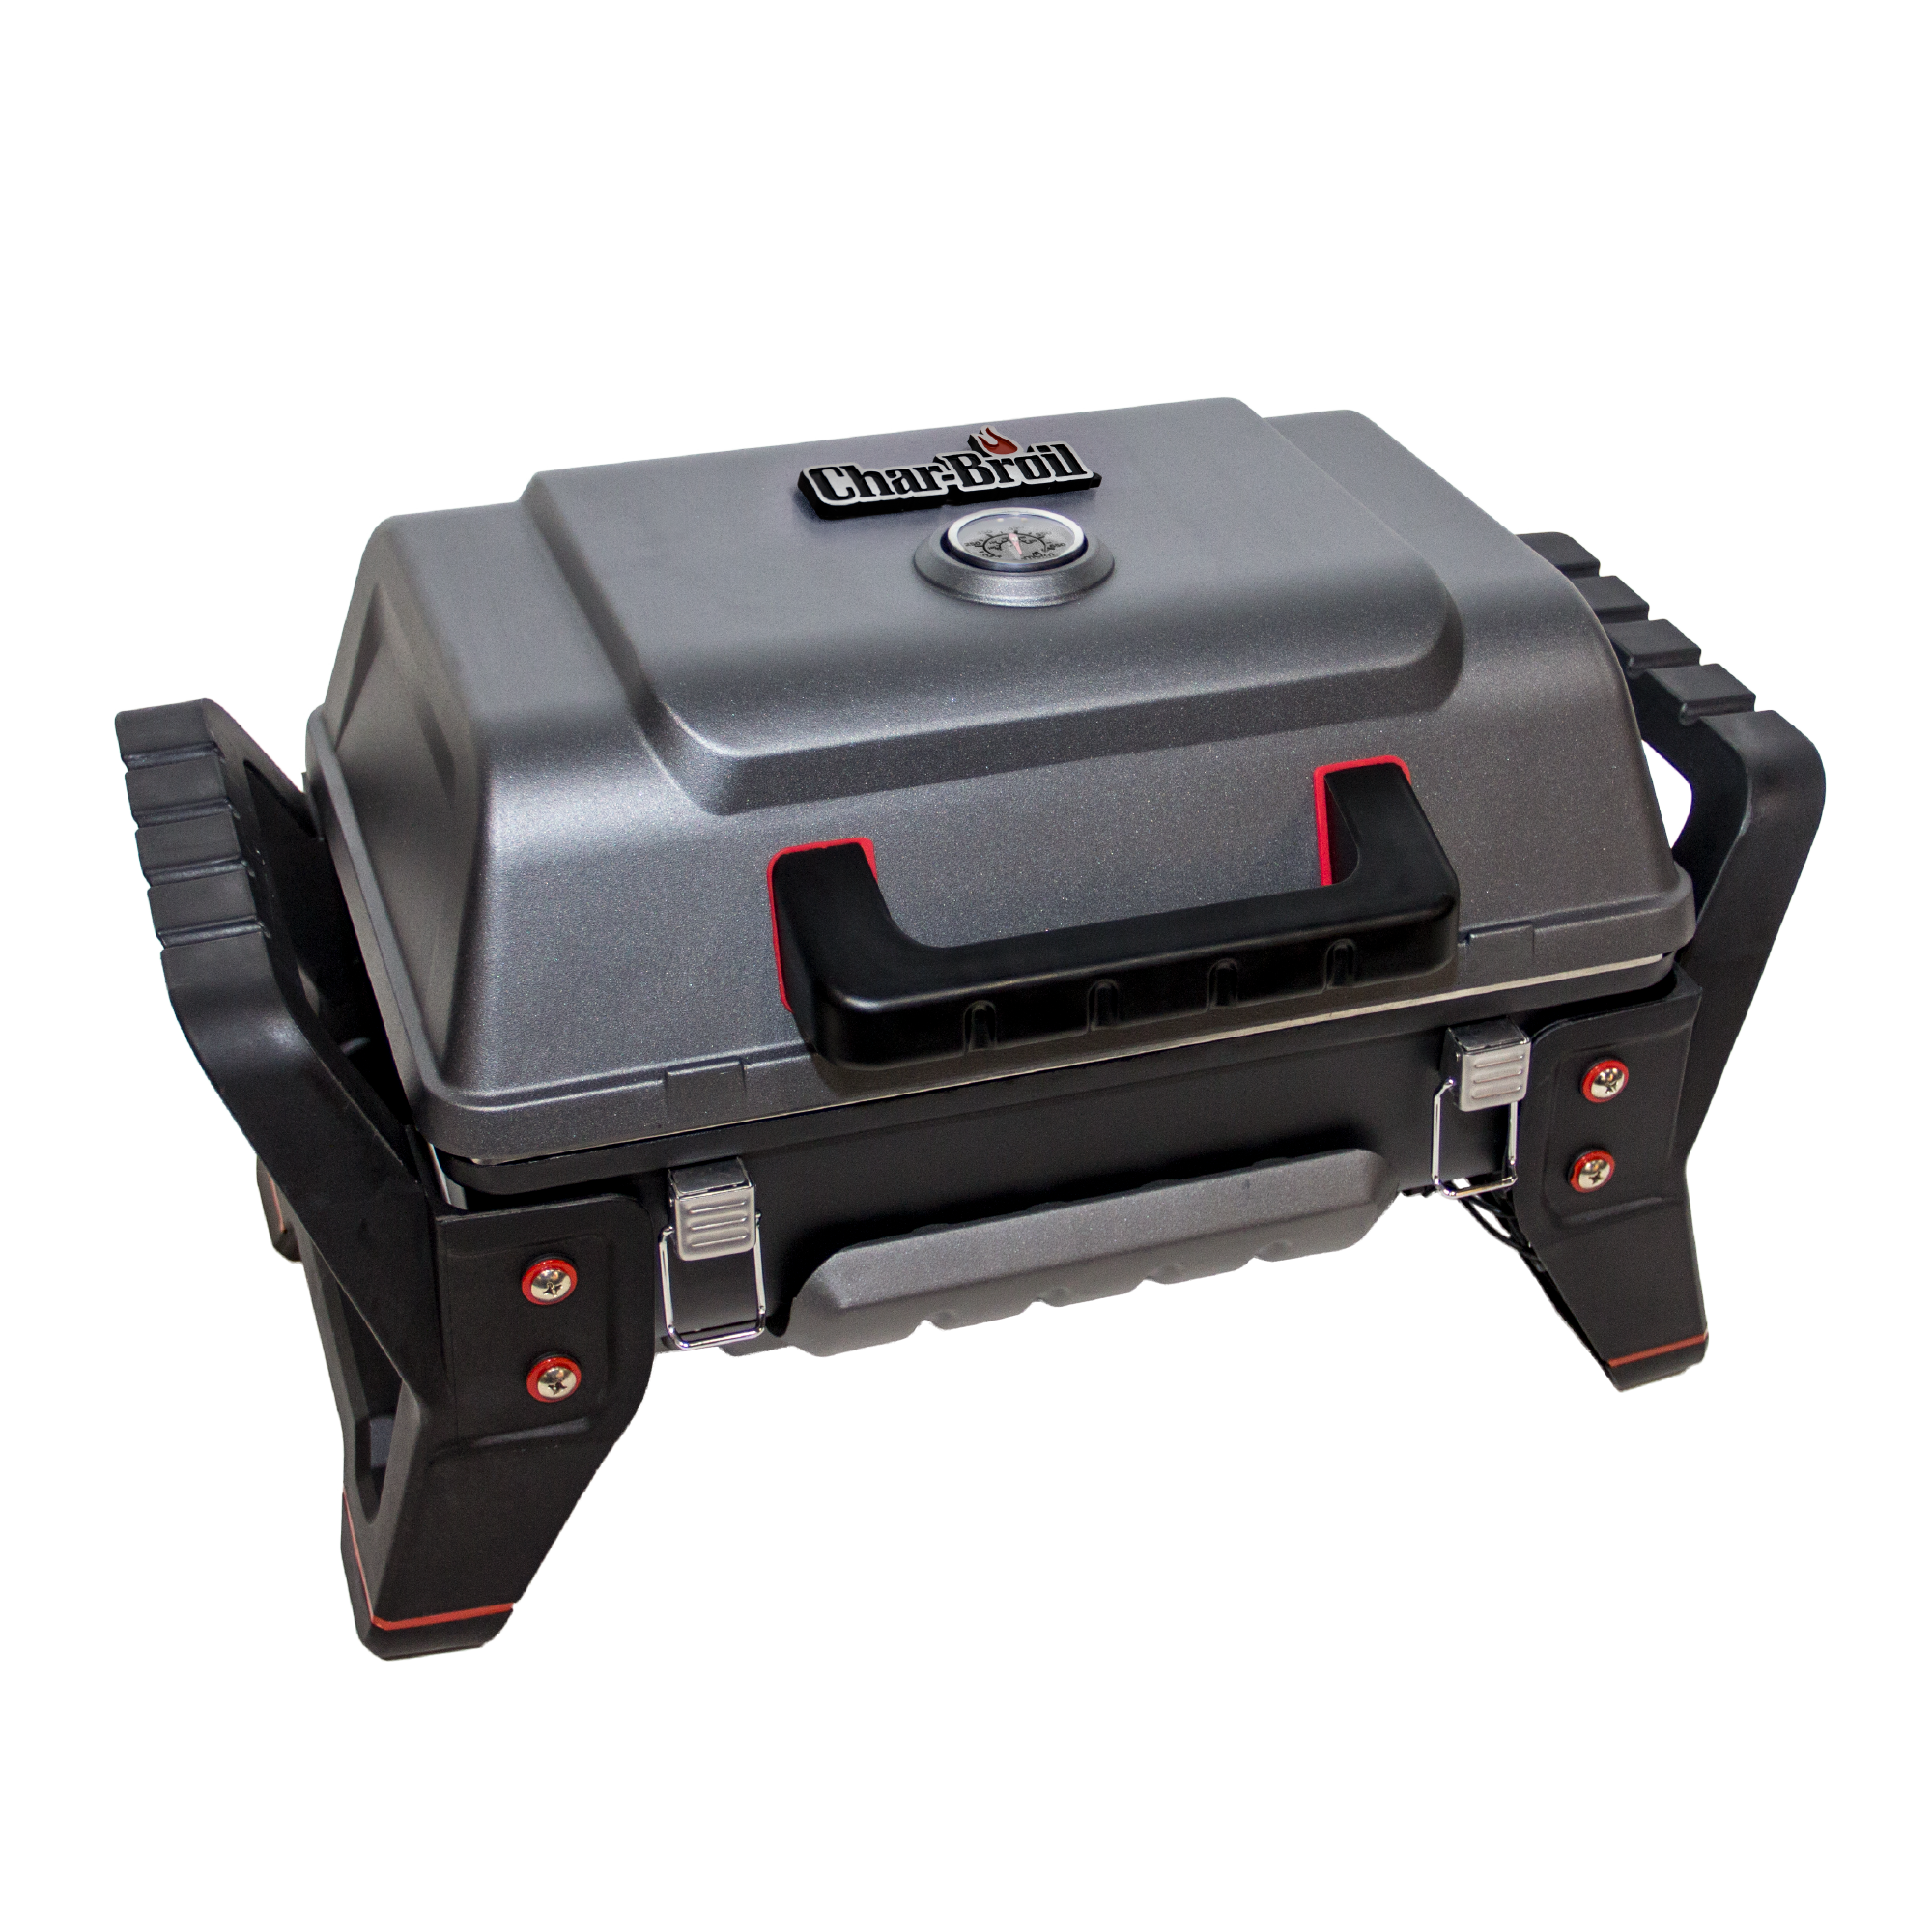 Char-Broil Grill2Go® Portable Gas Grill - image 2 of 12